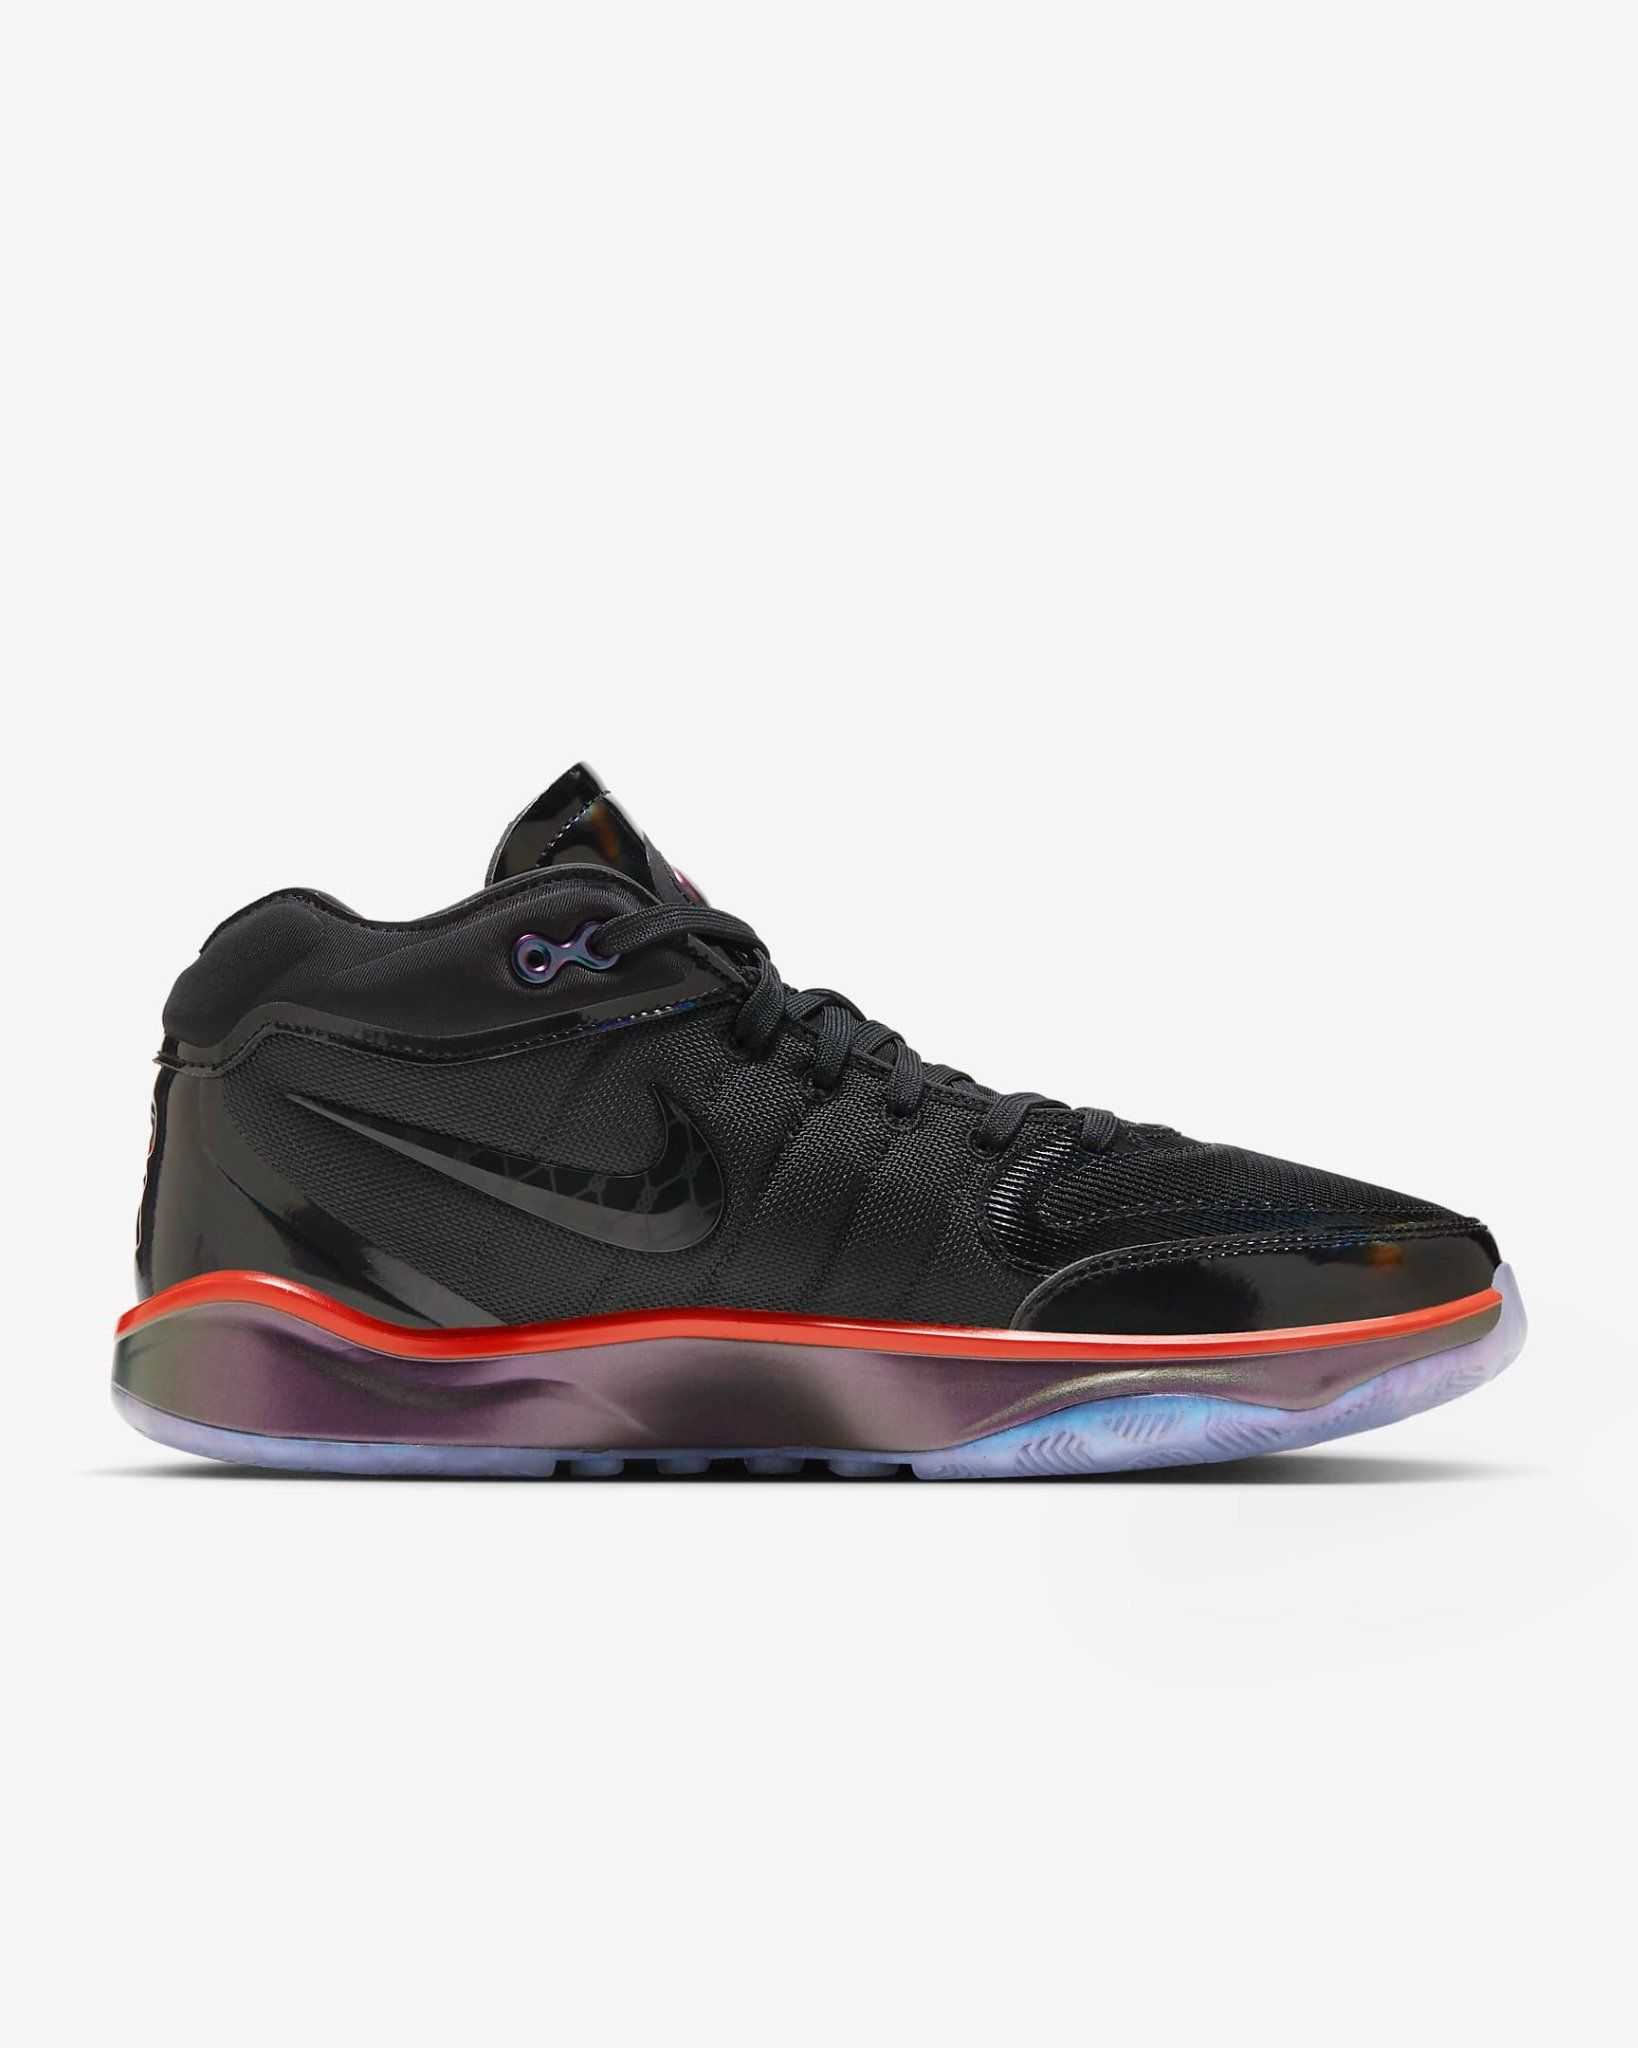 Nike - Giày thể thao Nam G.T. Hustle 2 GTE EP Basketball Shoes